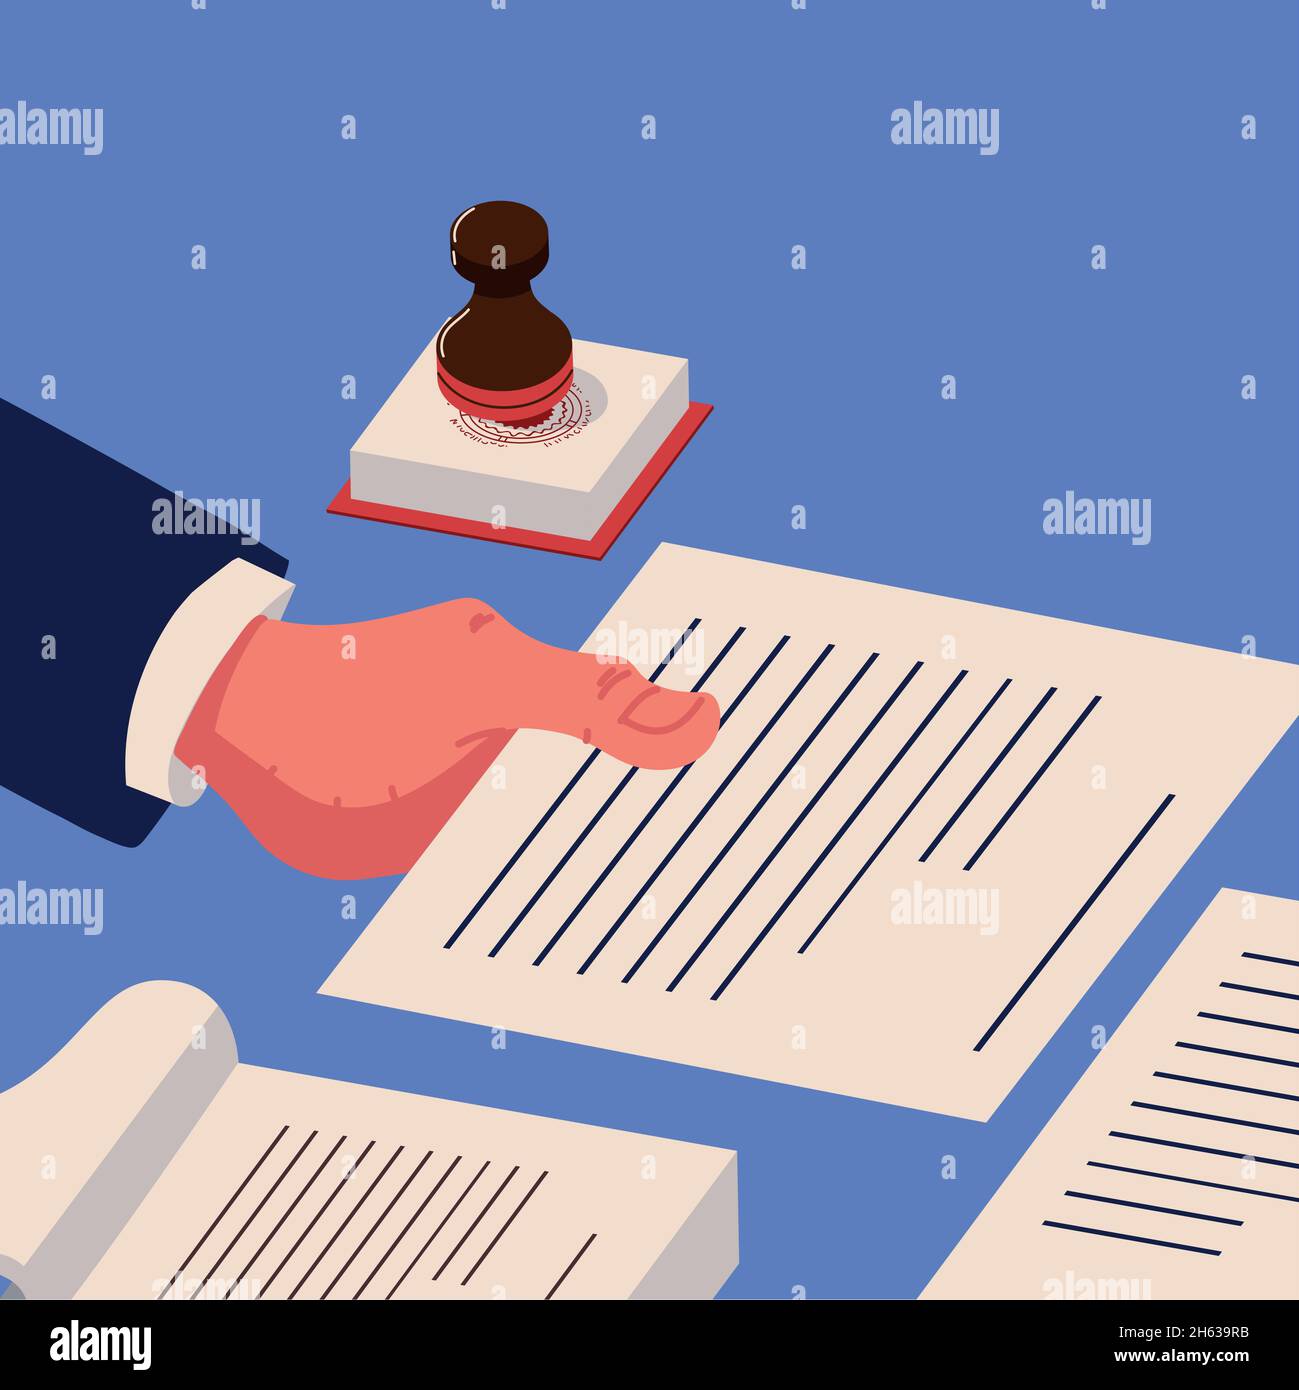 notary services, legal sealed papers Stock Vector